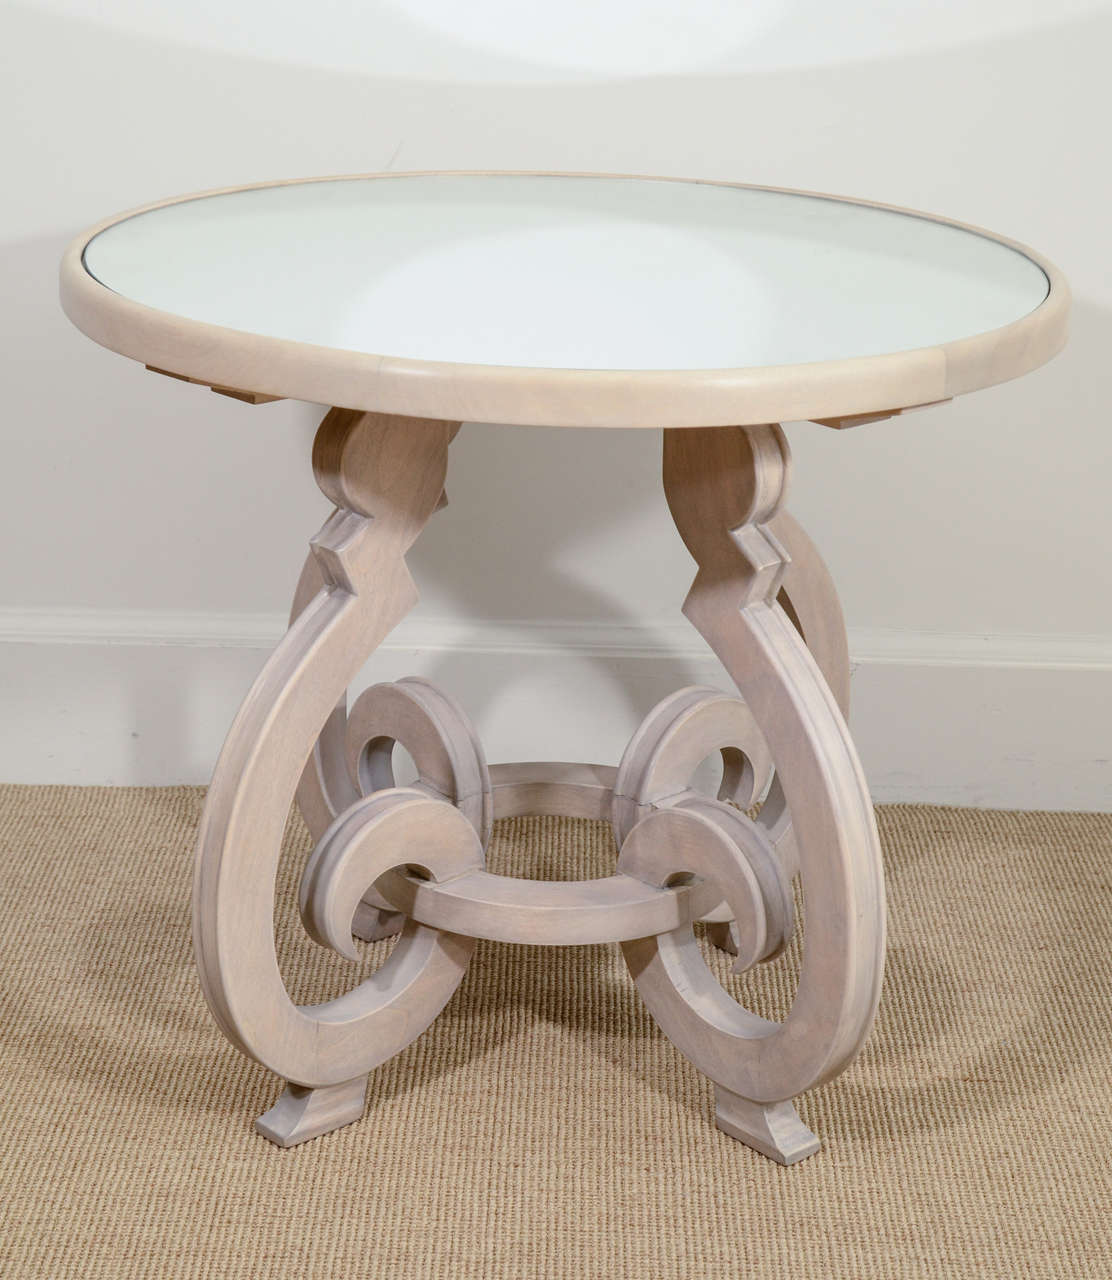 The circular topped table supporting a mirror, raised on four scrolling legs, lined by a circle.